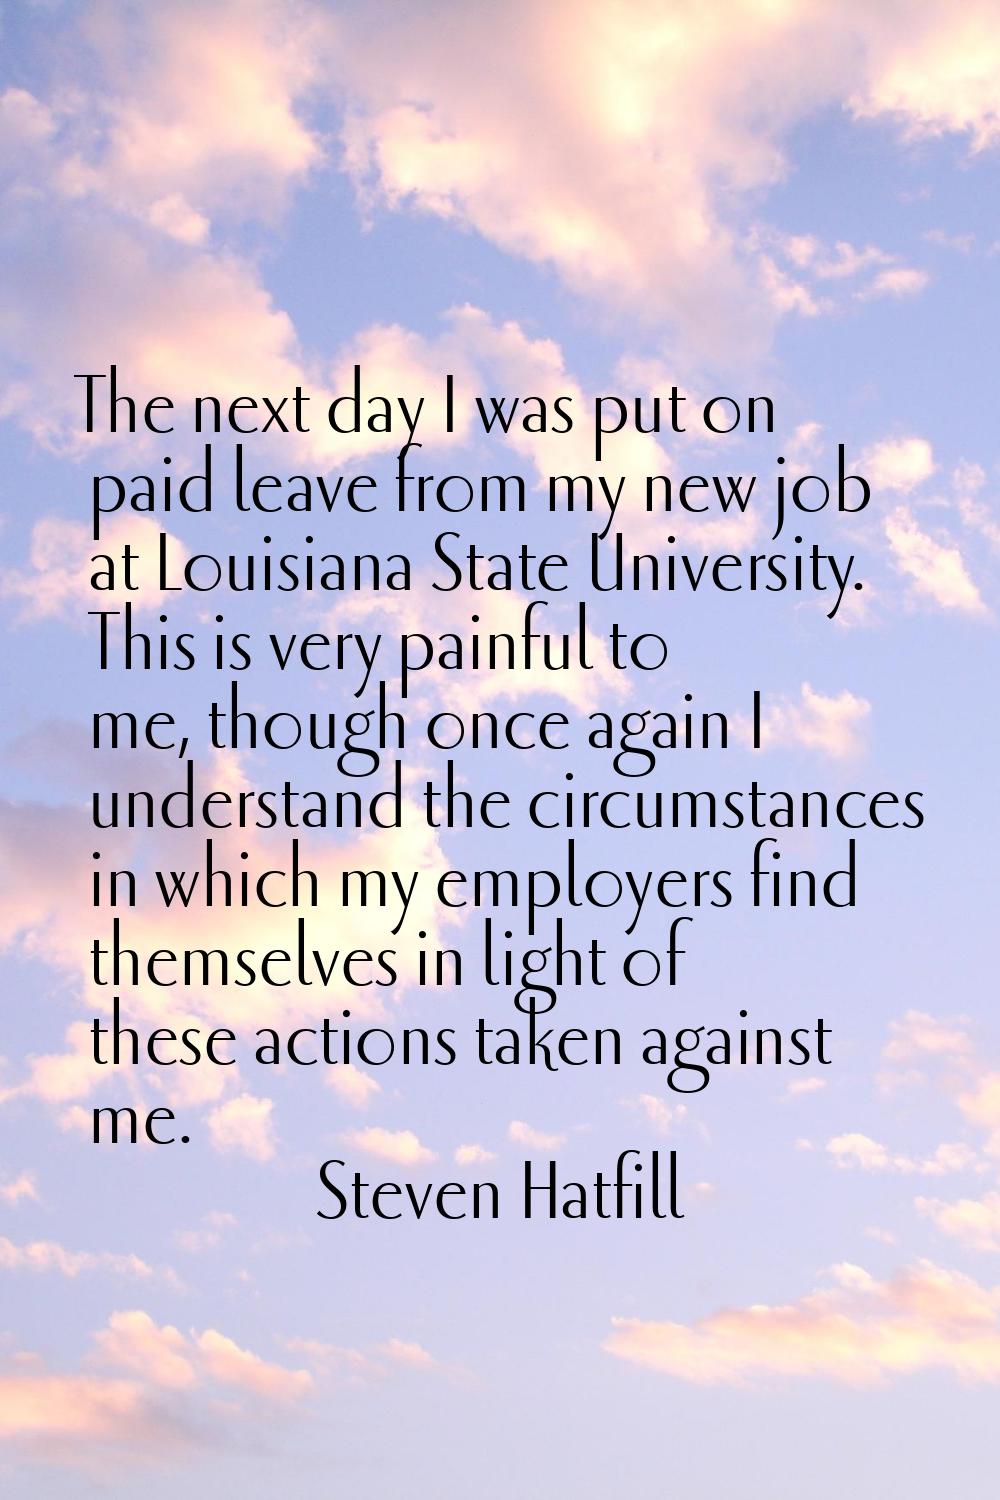 The next day I was put on paid leave from my new job at Louisiana State University. This is very pa